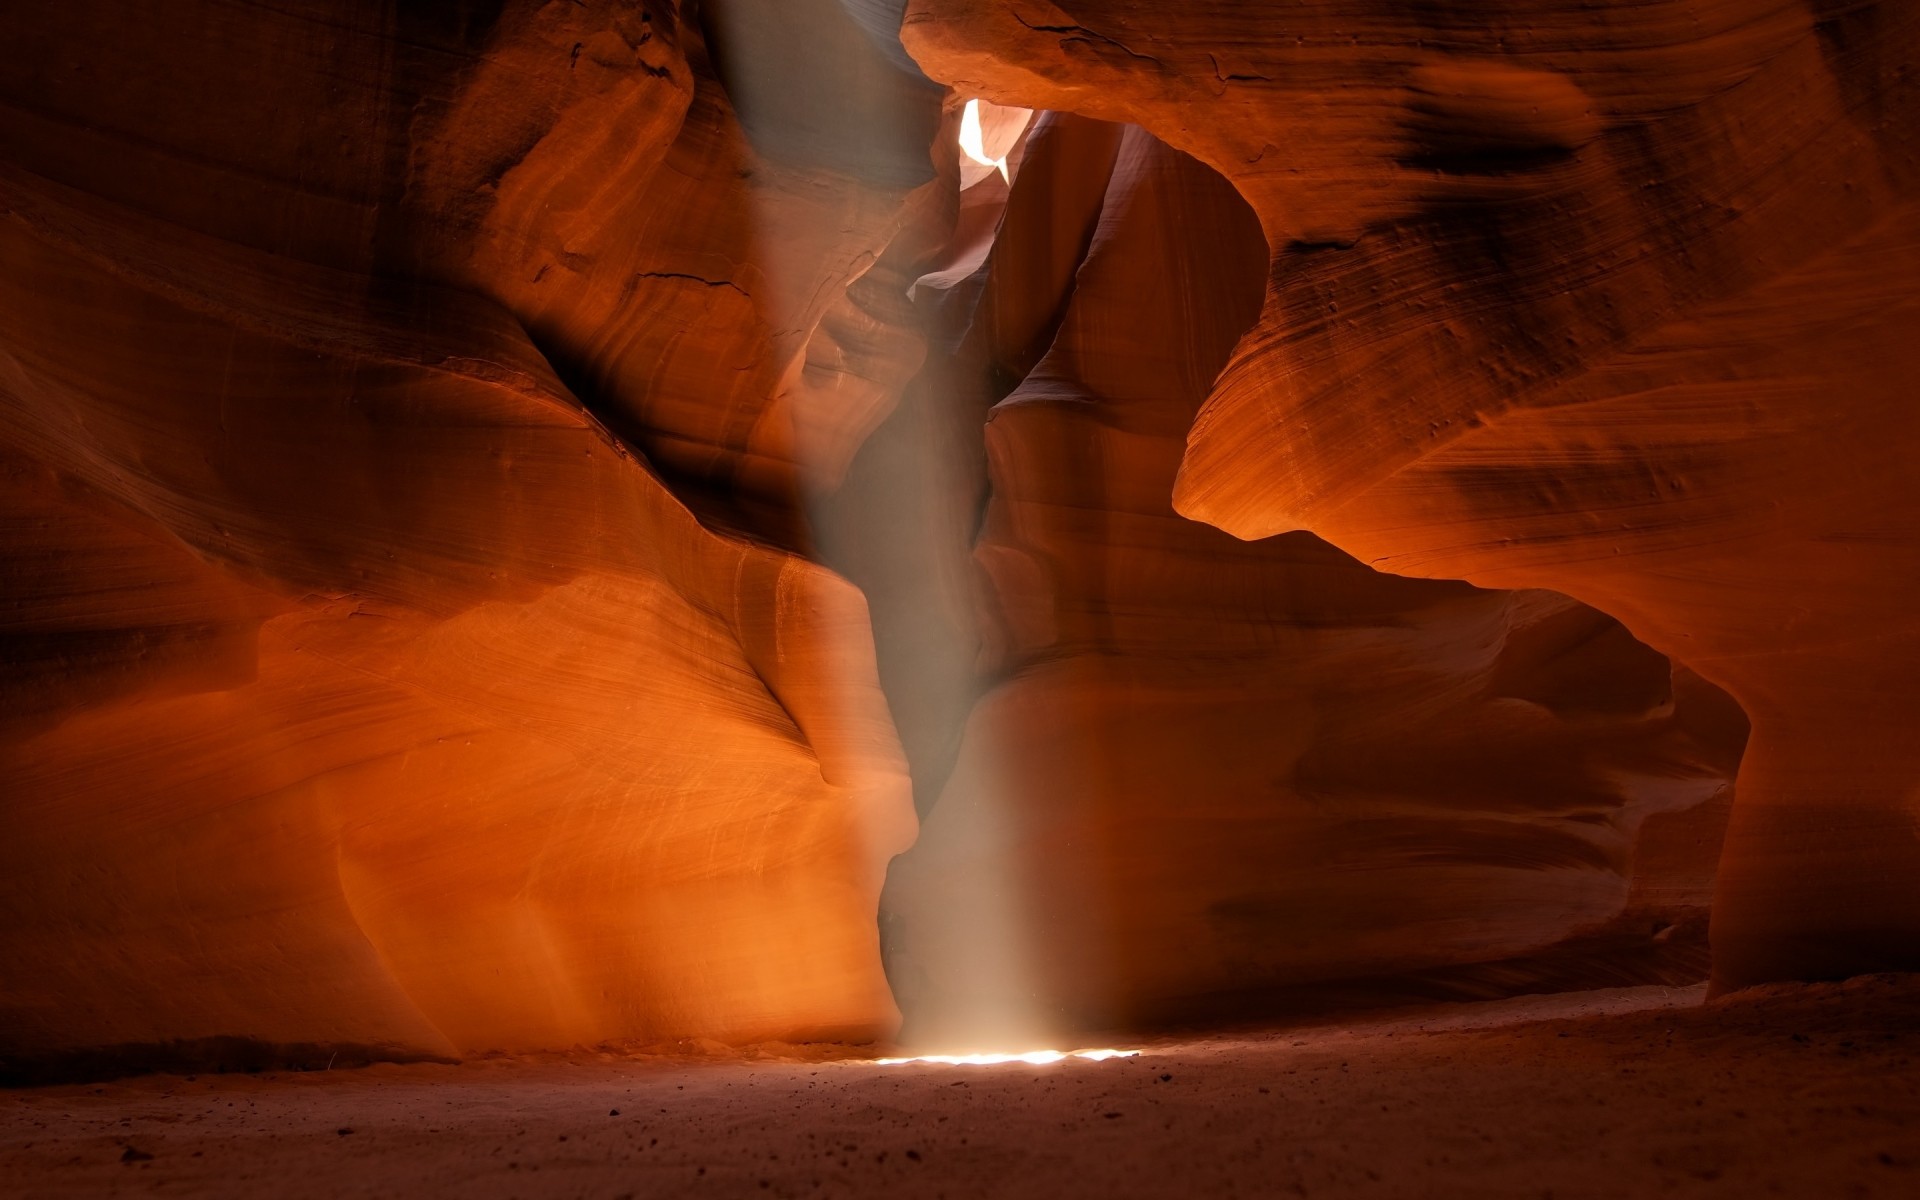 united states desert canyon blur landscape sunset sandstone art antelope light sand rock travel dawn motion adult shadow water cave stone ray texture